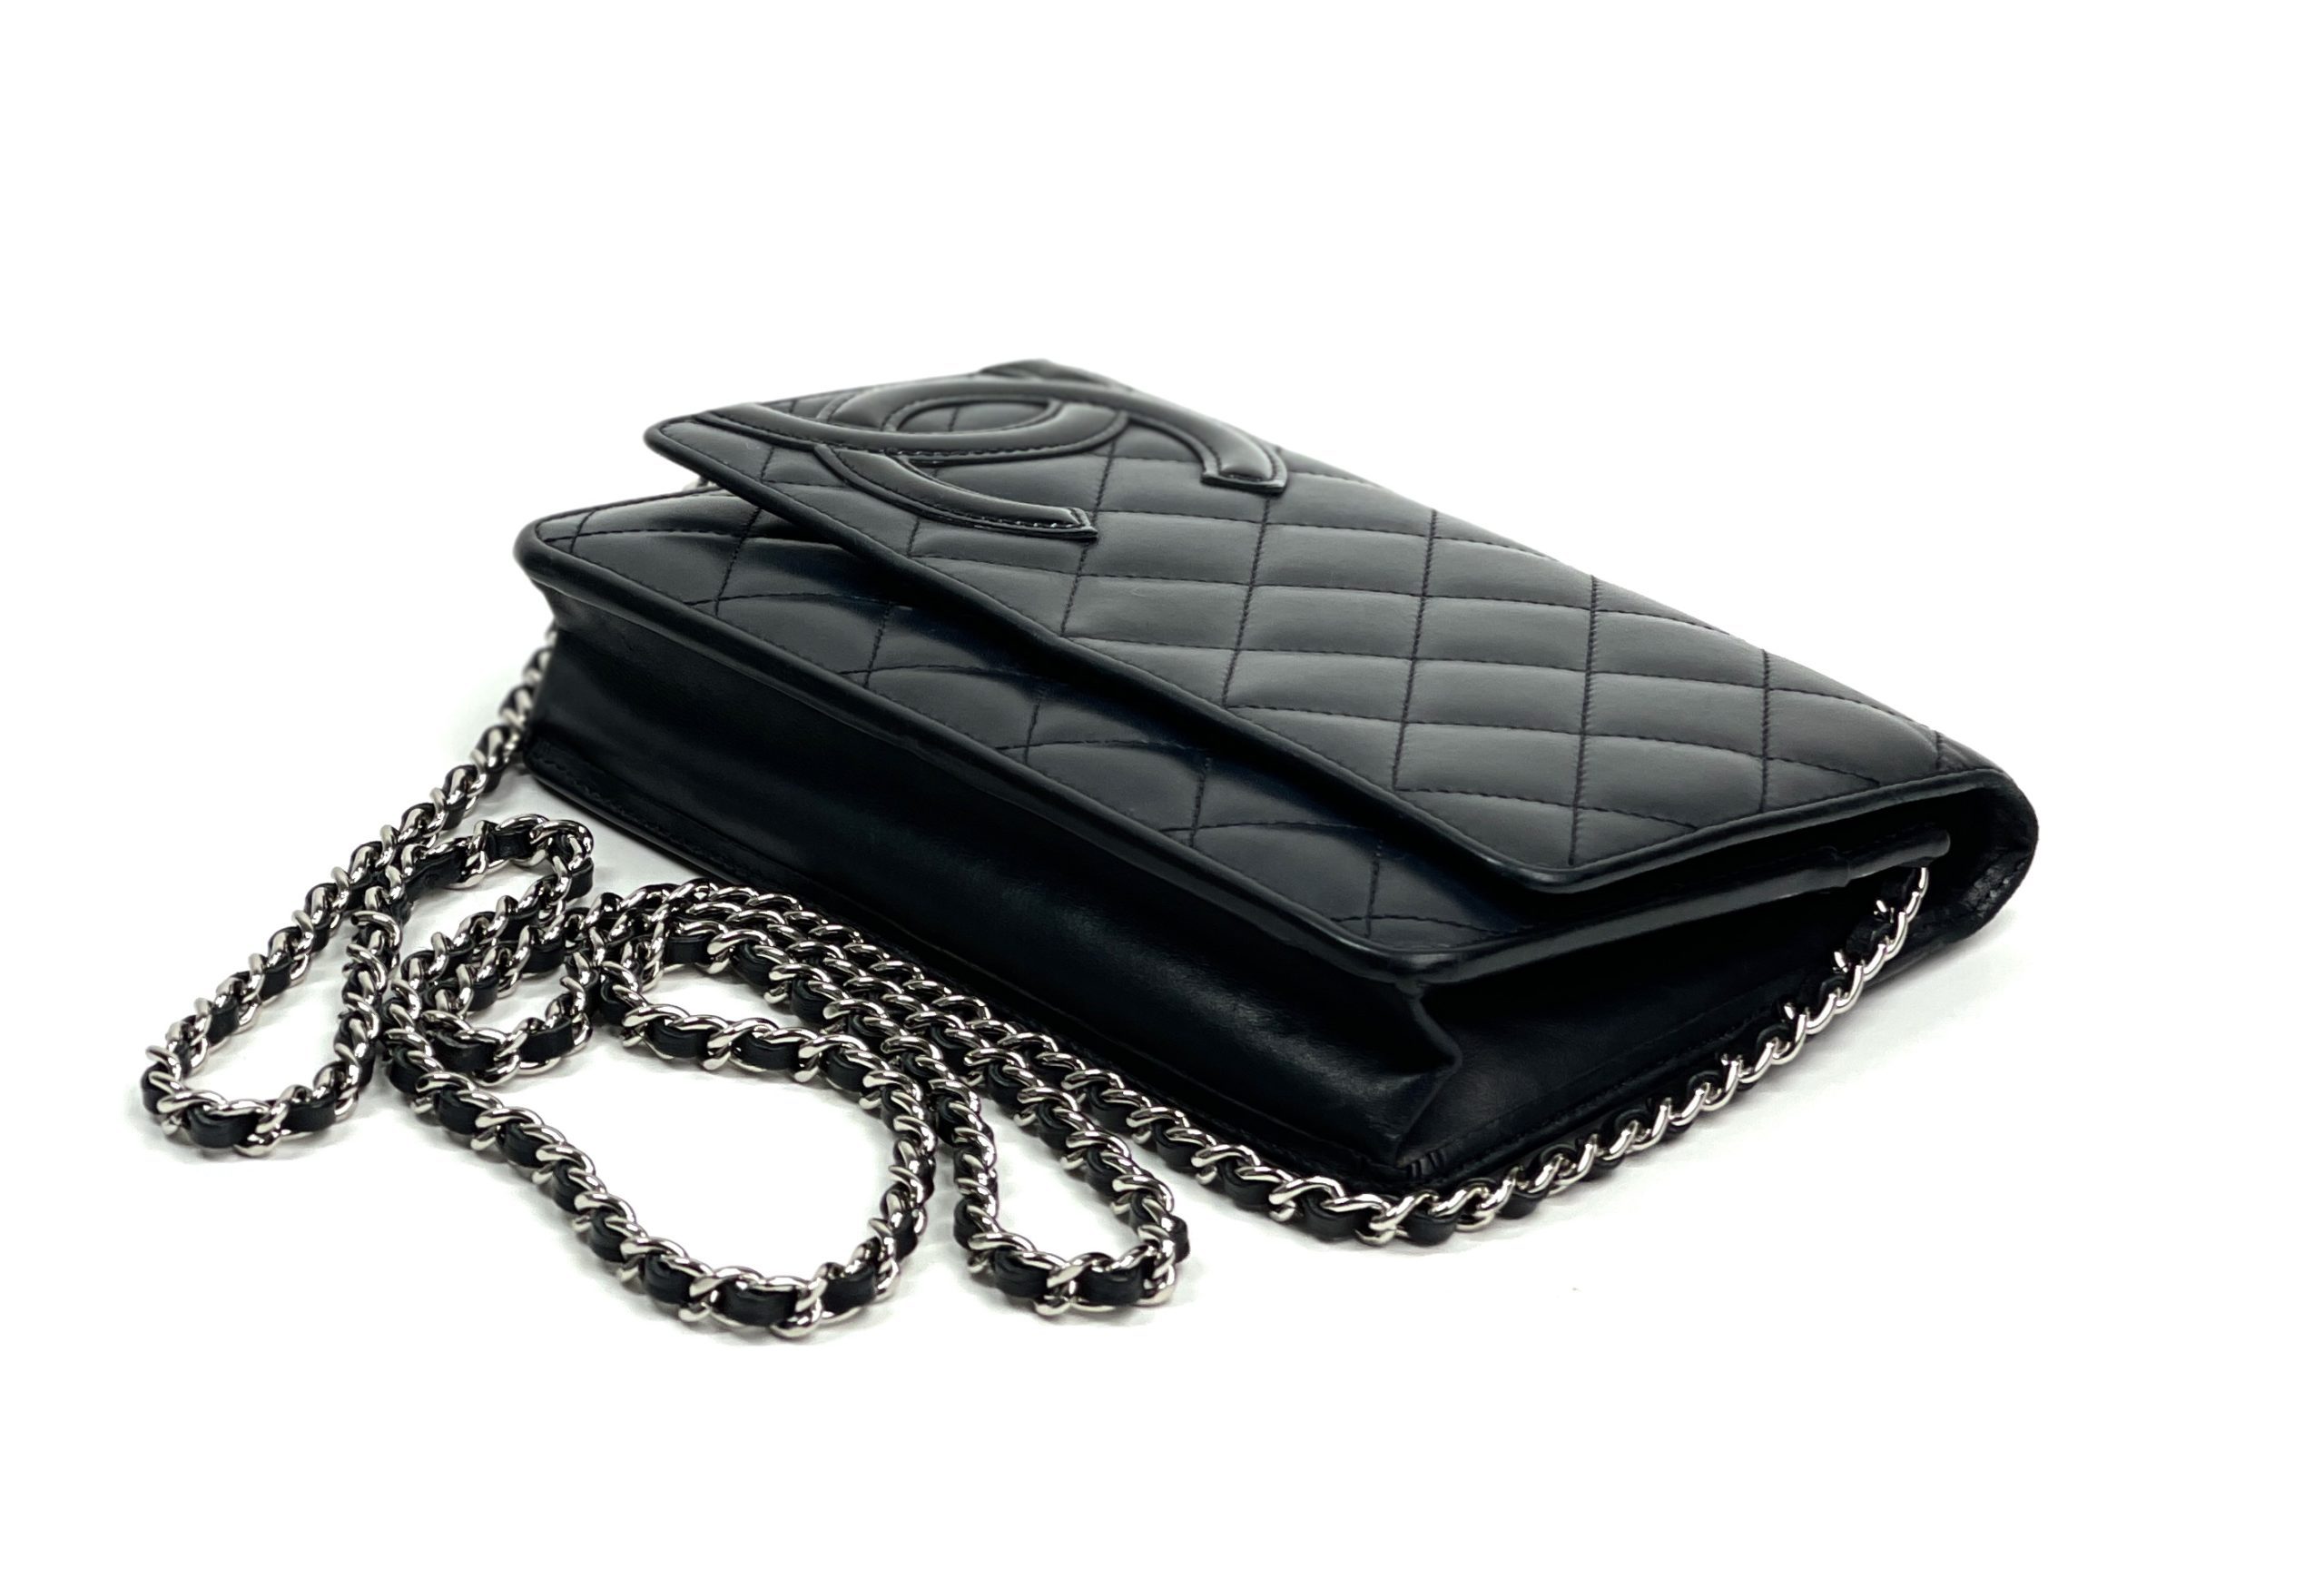 CHANEL - Calfskin Quilted Cambon Red / Silver Wallet On Chain